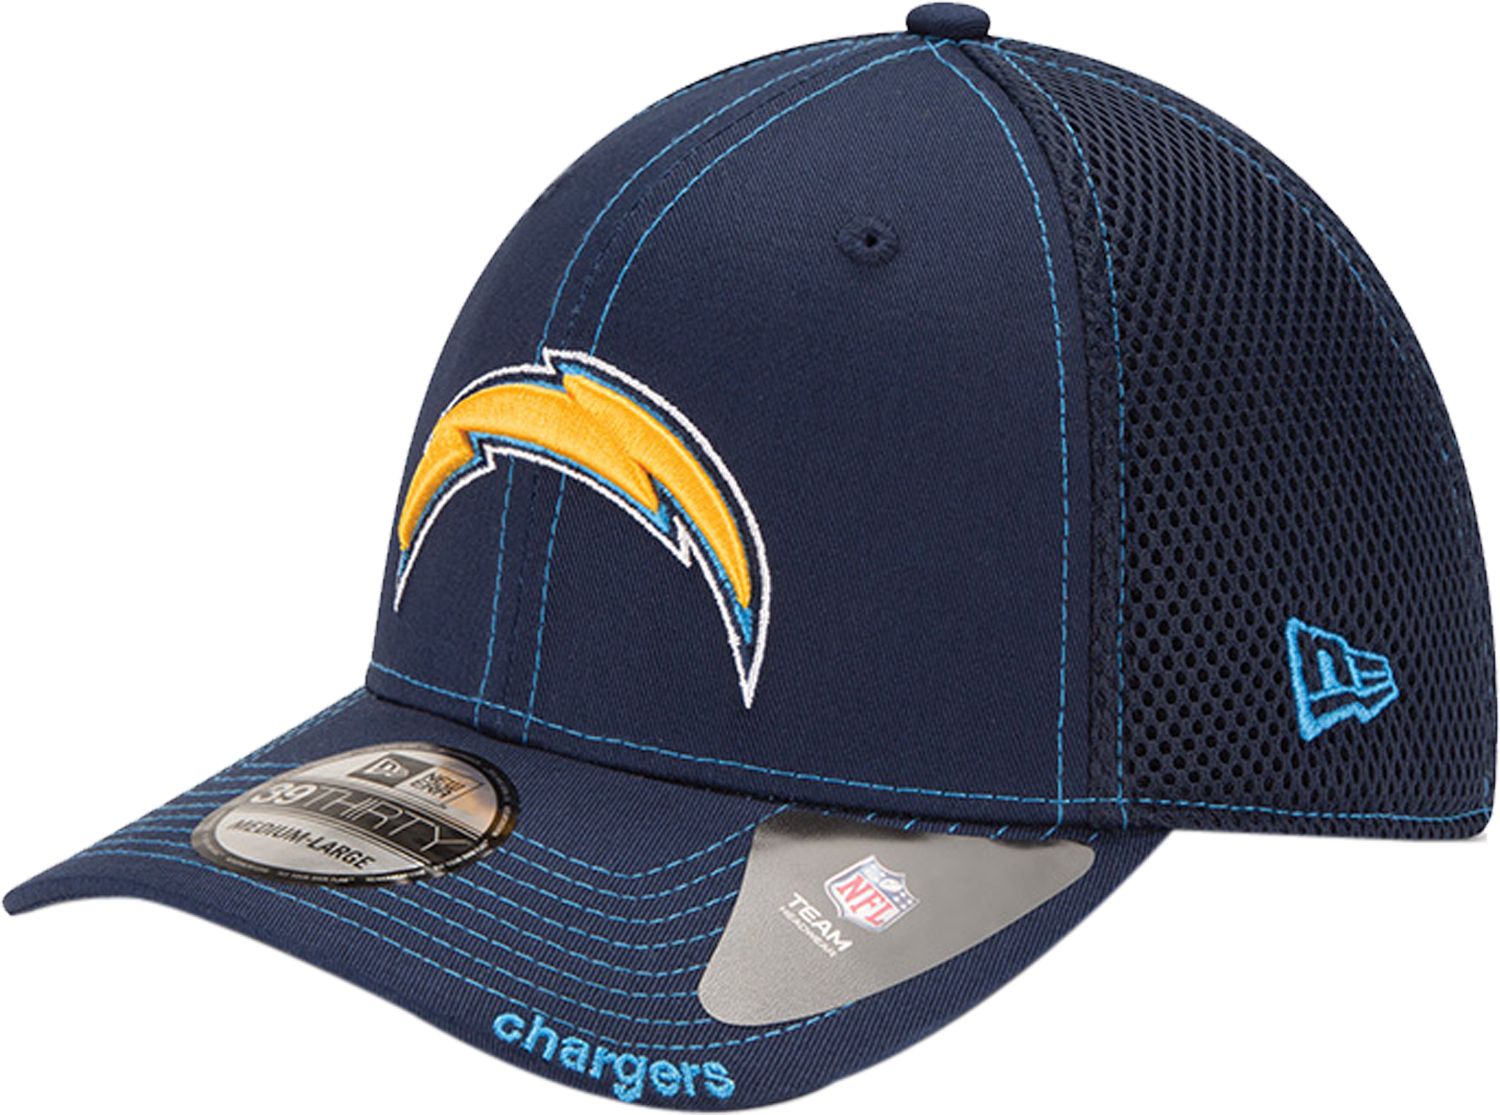 san diego chargers hat